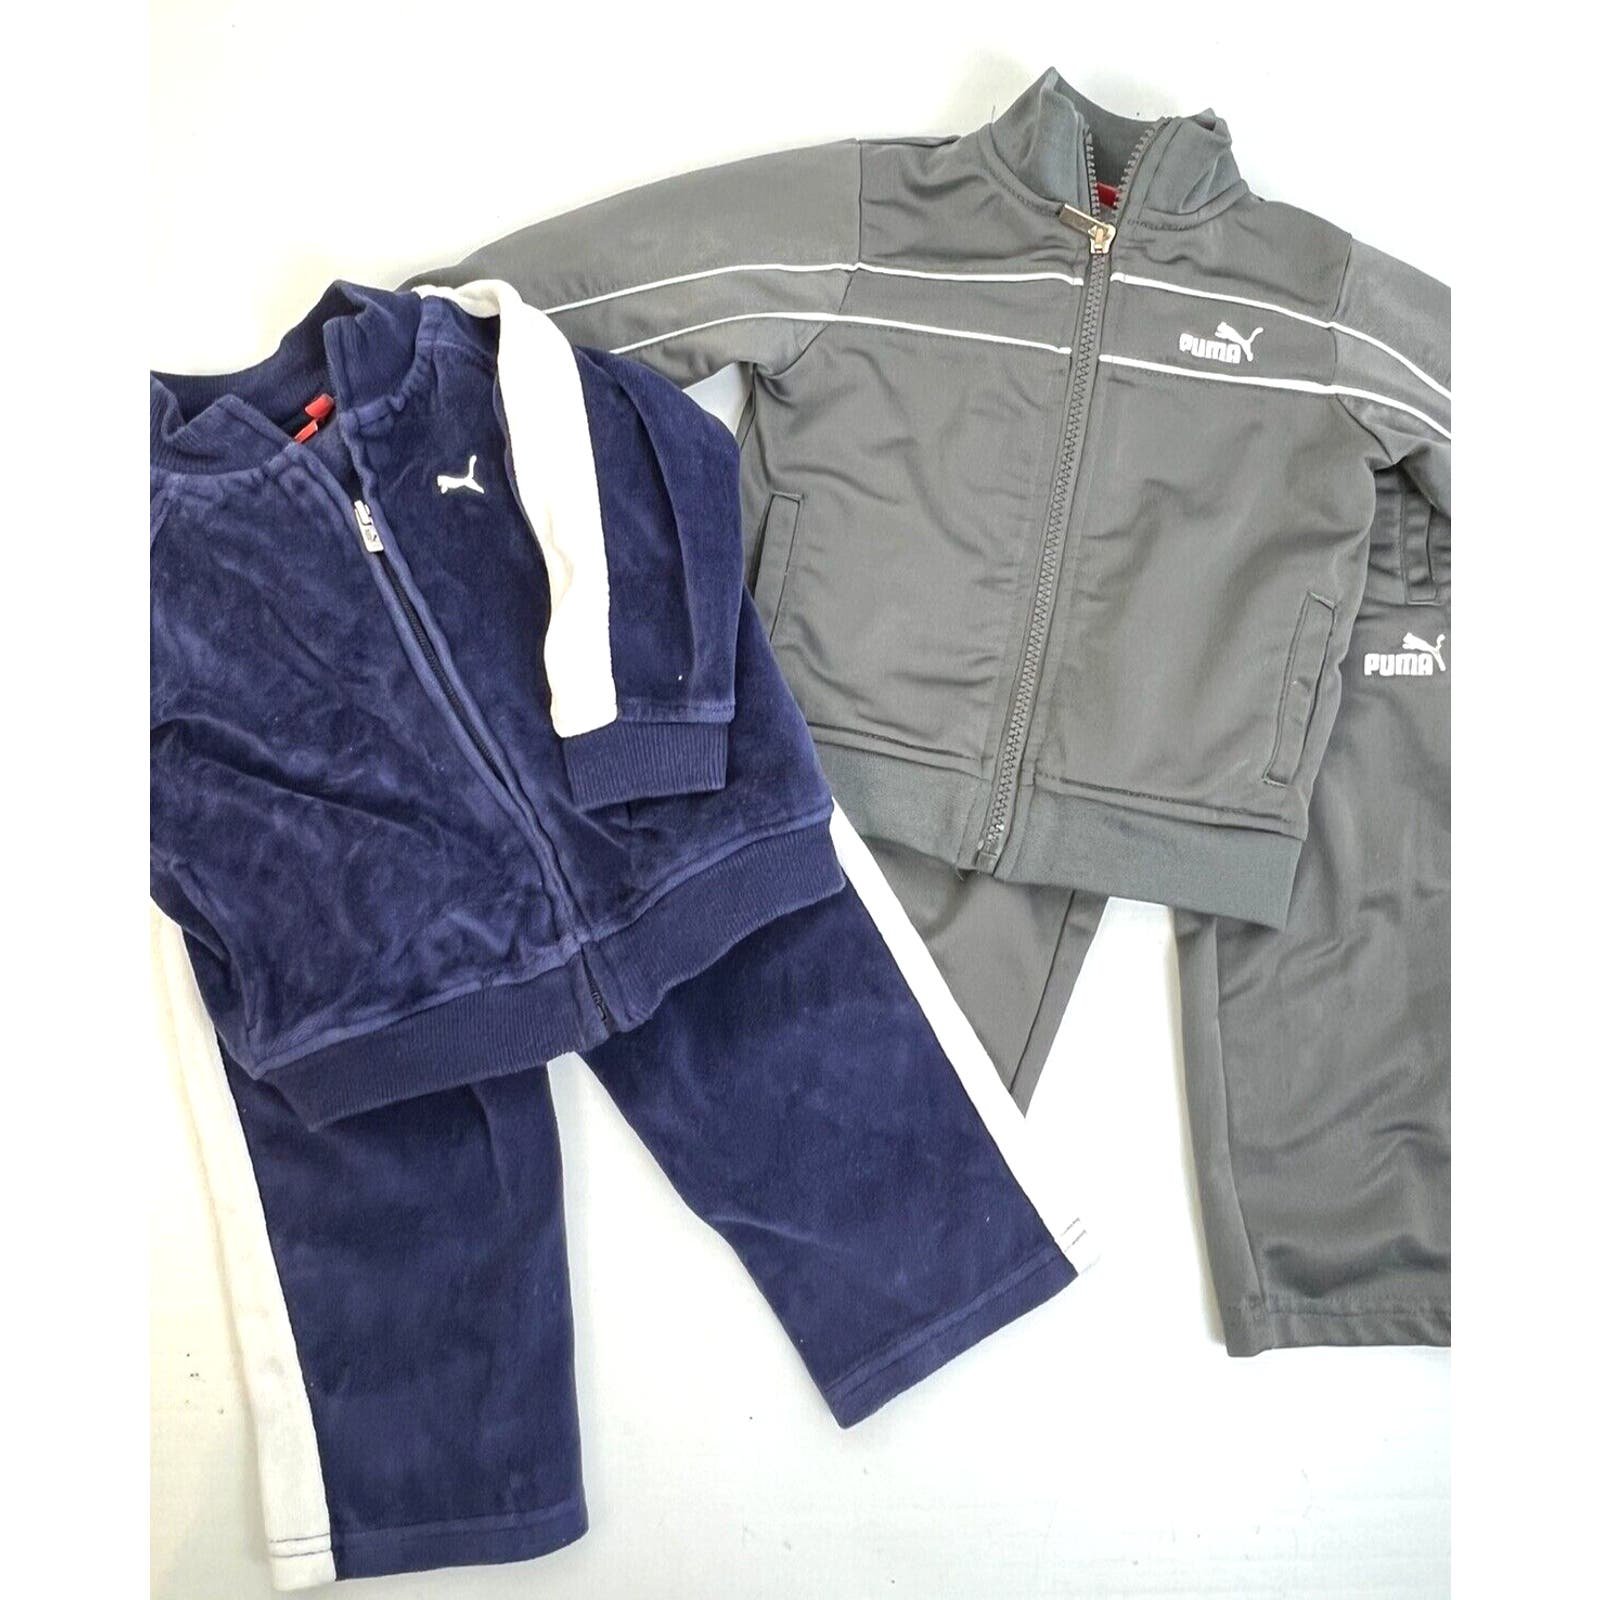 Puma Warm Up Suits Unisex 18 Months Blue White Gray Casual Jacket Pants Play 5tQd0DTg1